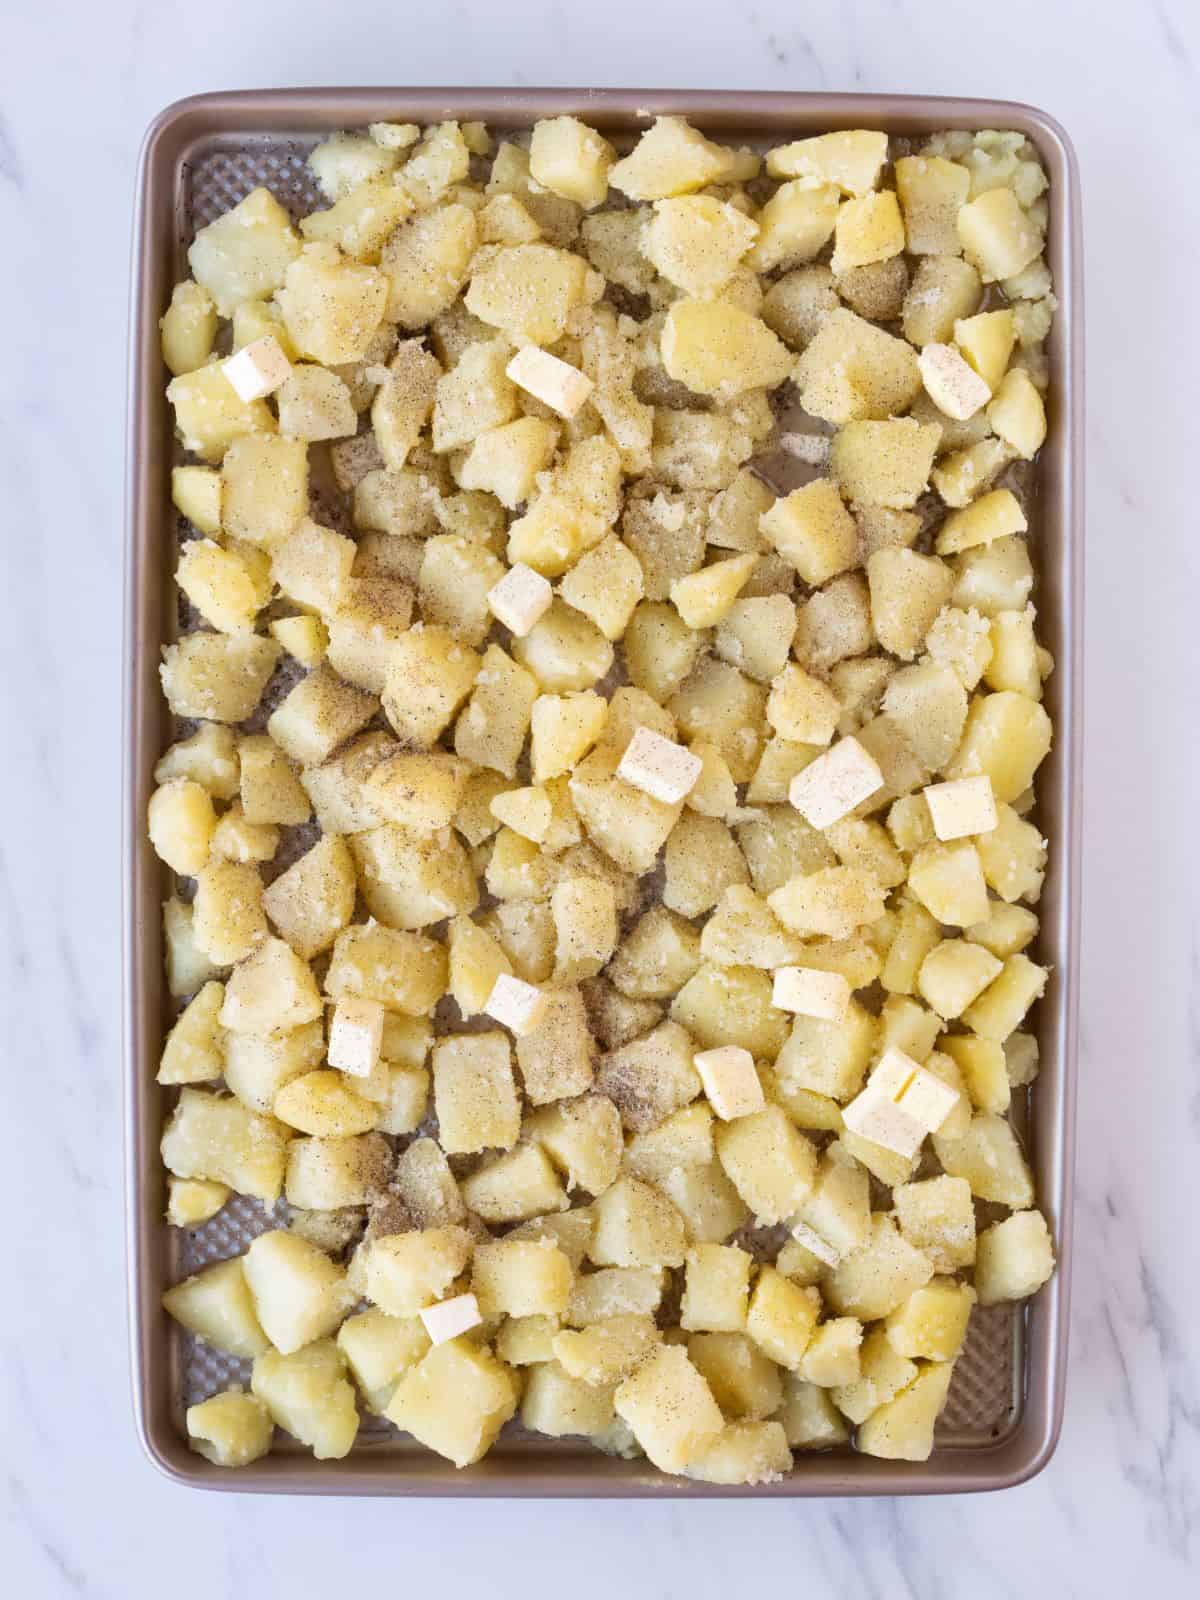 A baking sheet with boiled cubed potatoes on it that are seasoned with salt and pepper.